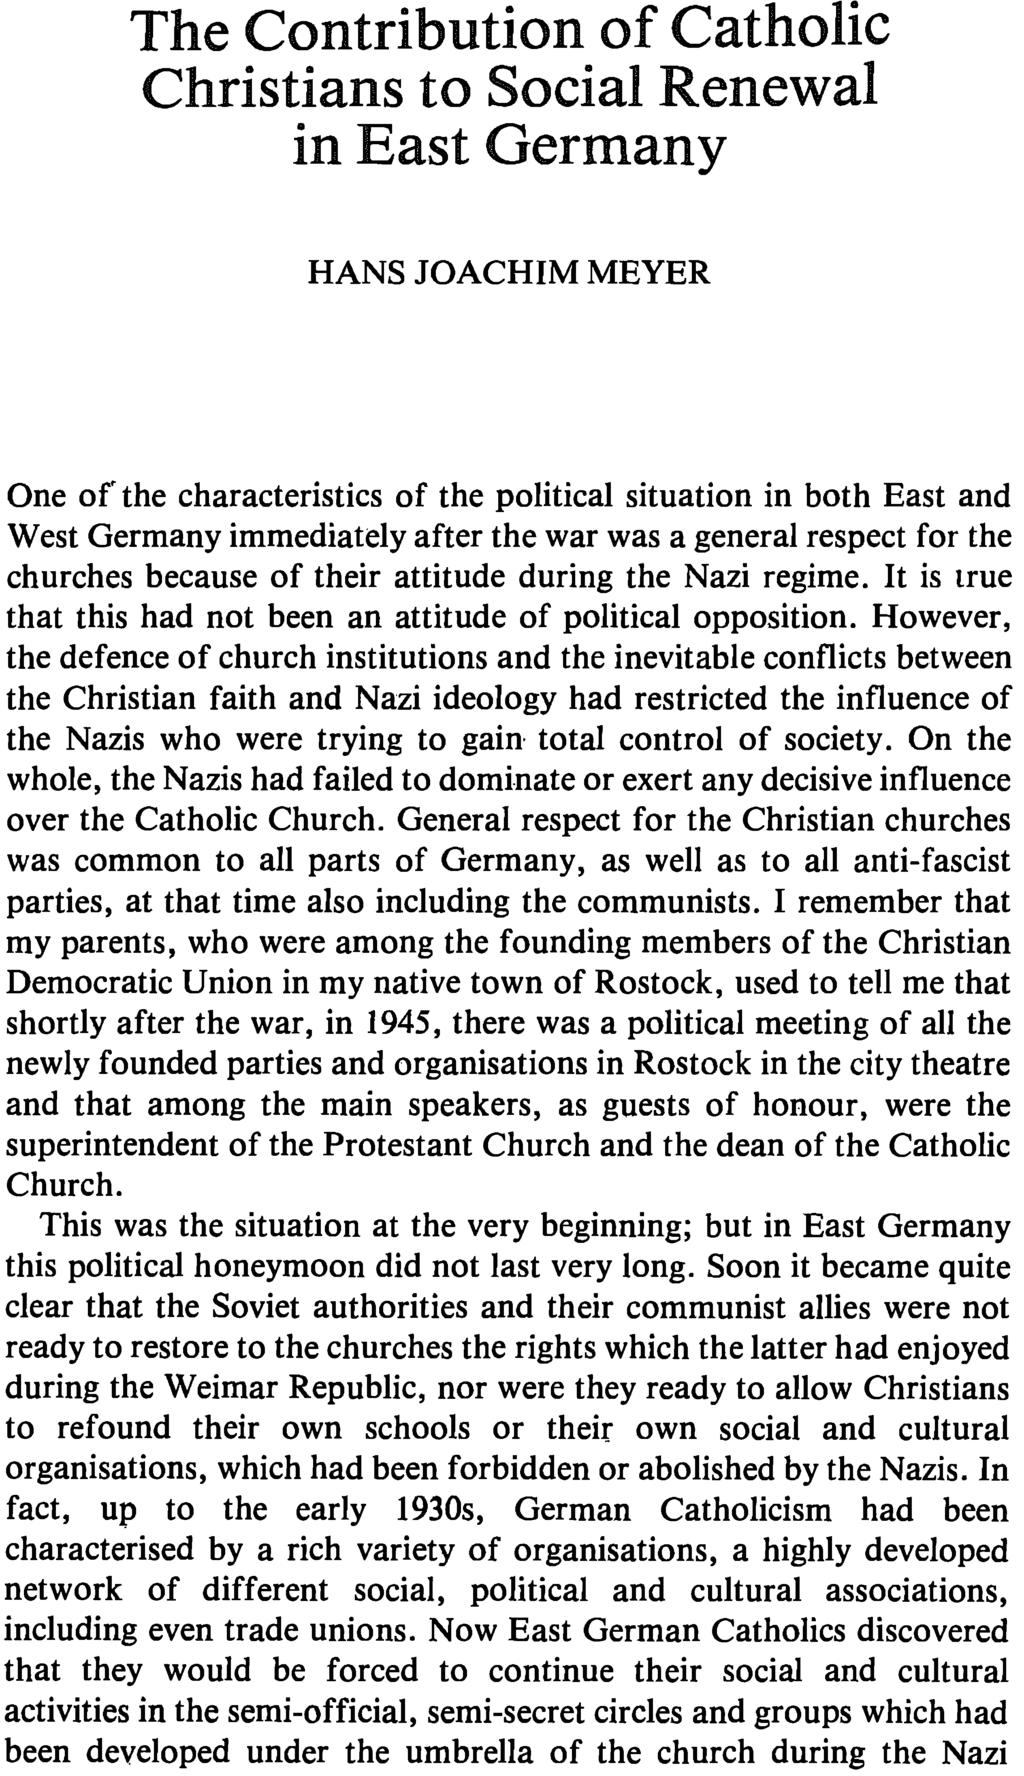 The Contribution of Catholic Christians to Social Renewal in East Germany HANS JOACHIM MEYER One of'the characteristics of the political situation in both East and West Germany immediately after the